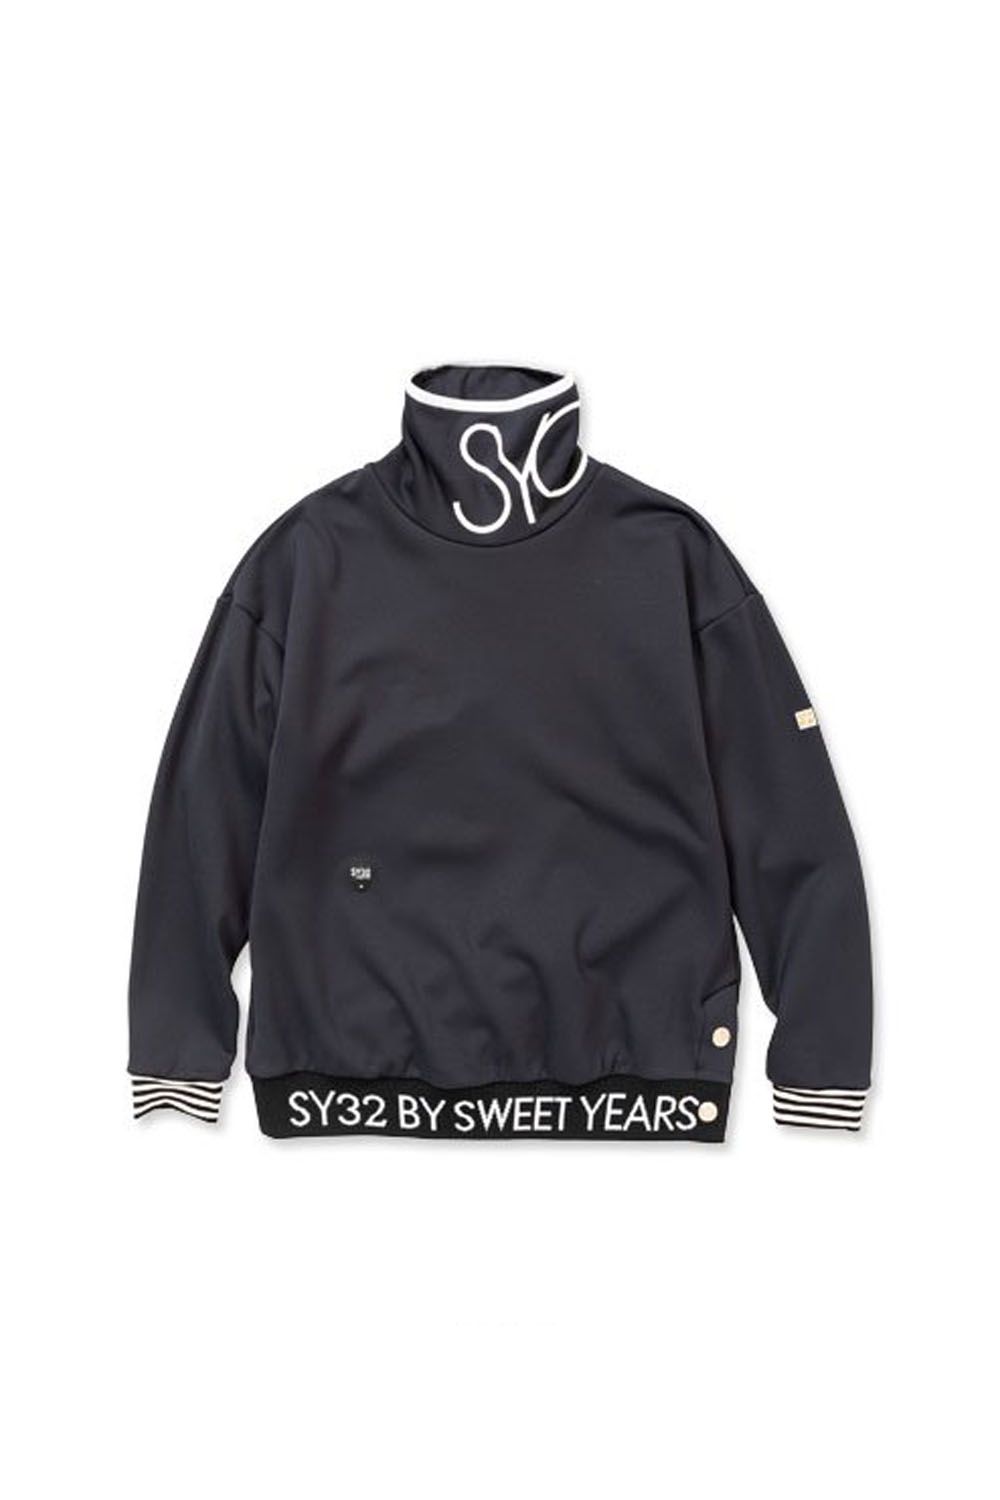 SY32 by SWEET YEARS GOLF - 【レディース】 NECK LOGO HIGH NECK